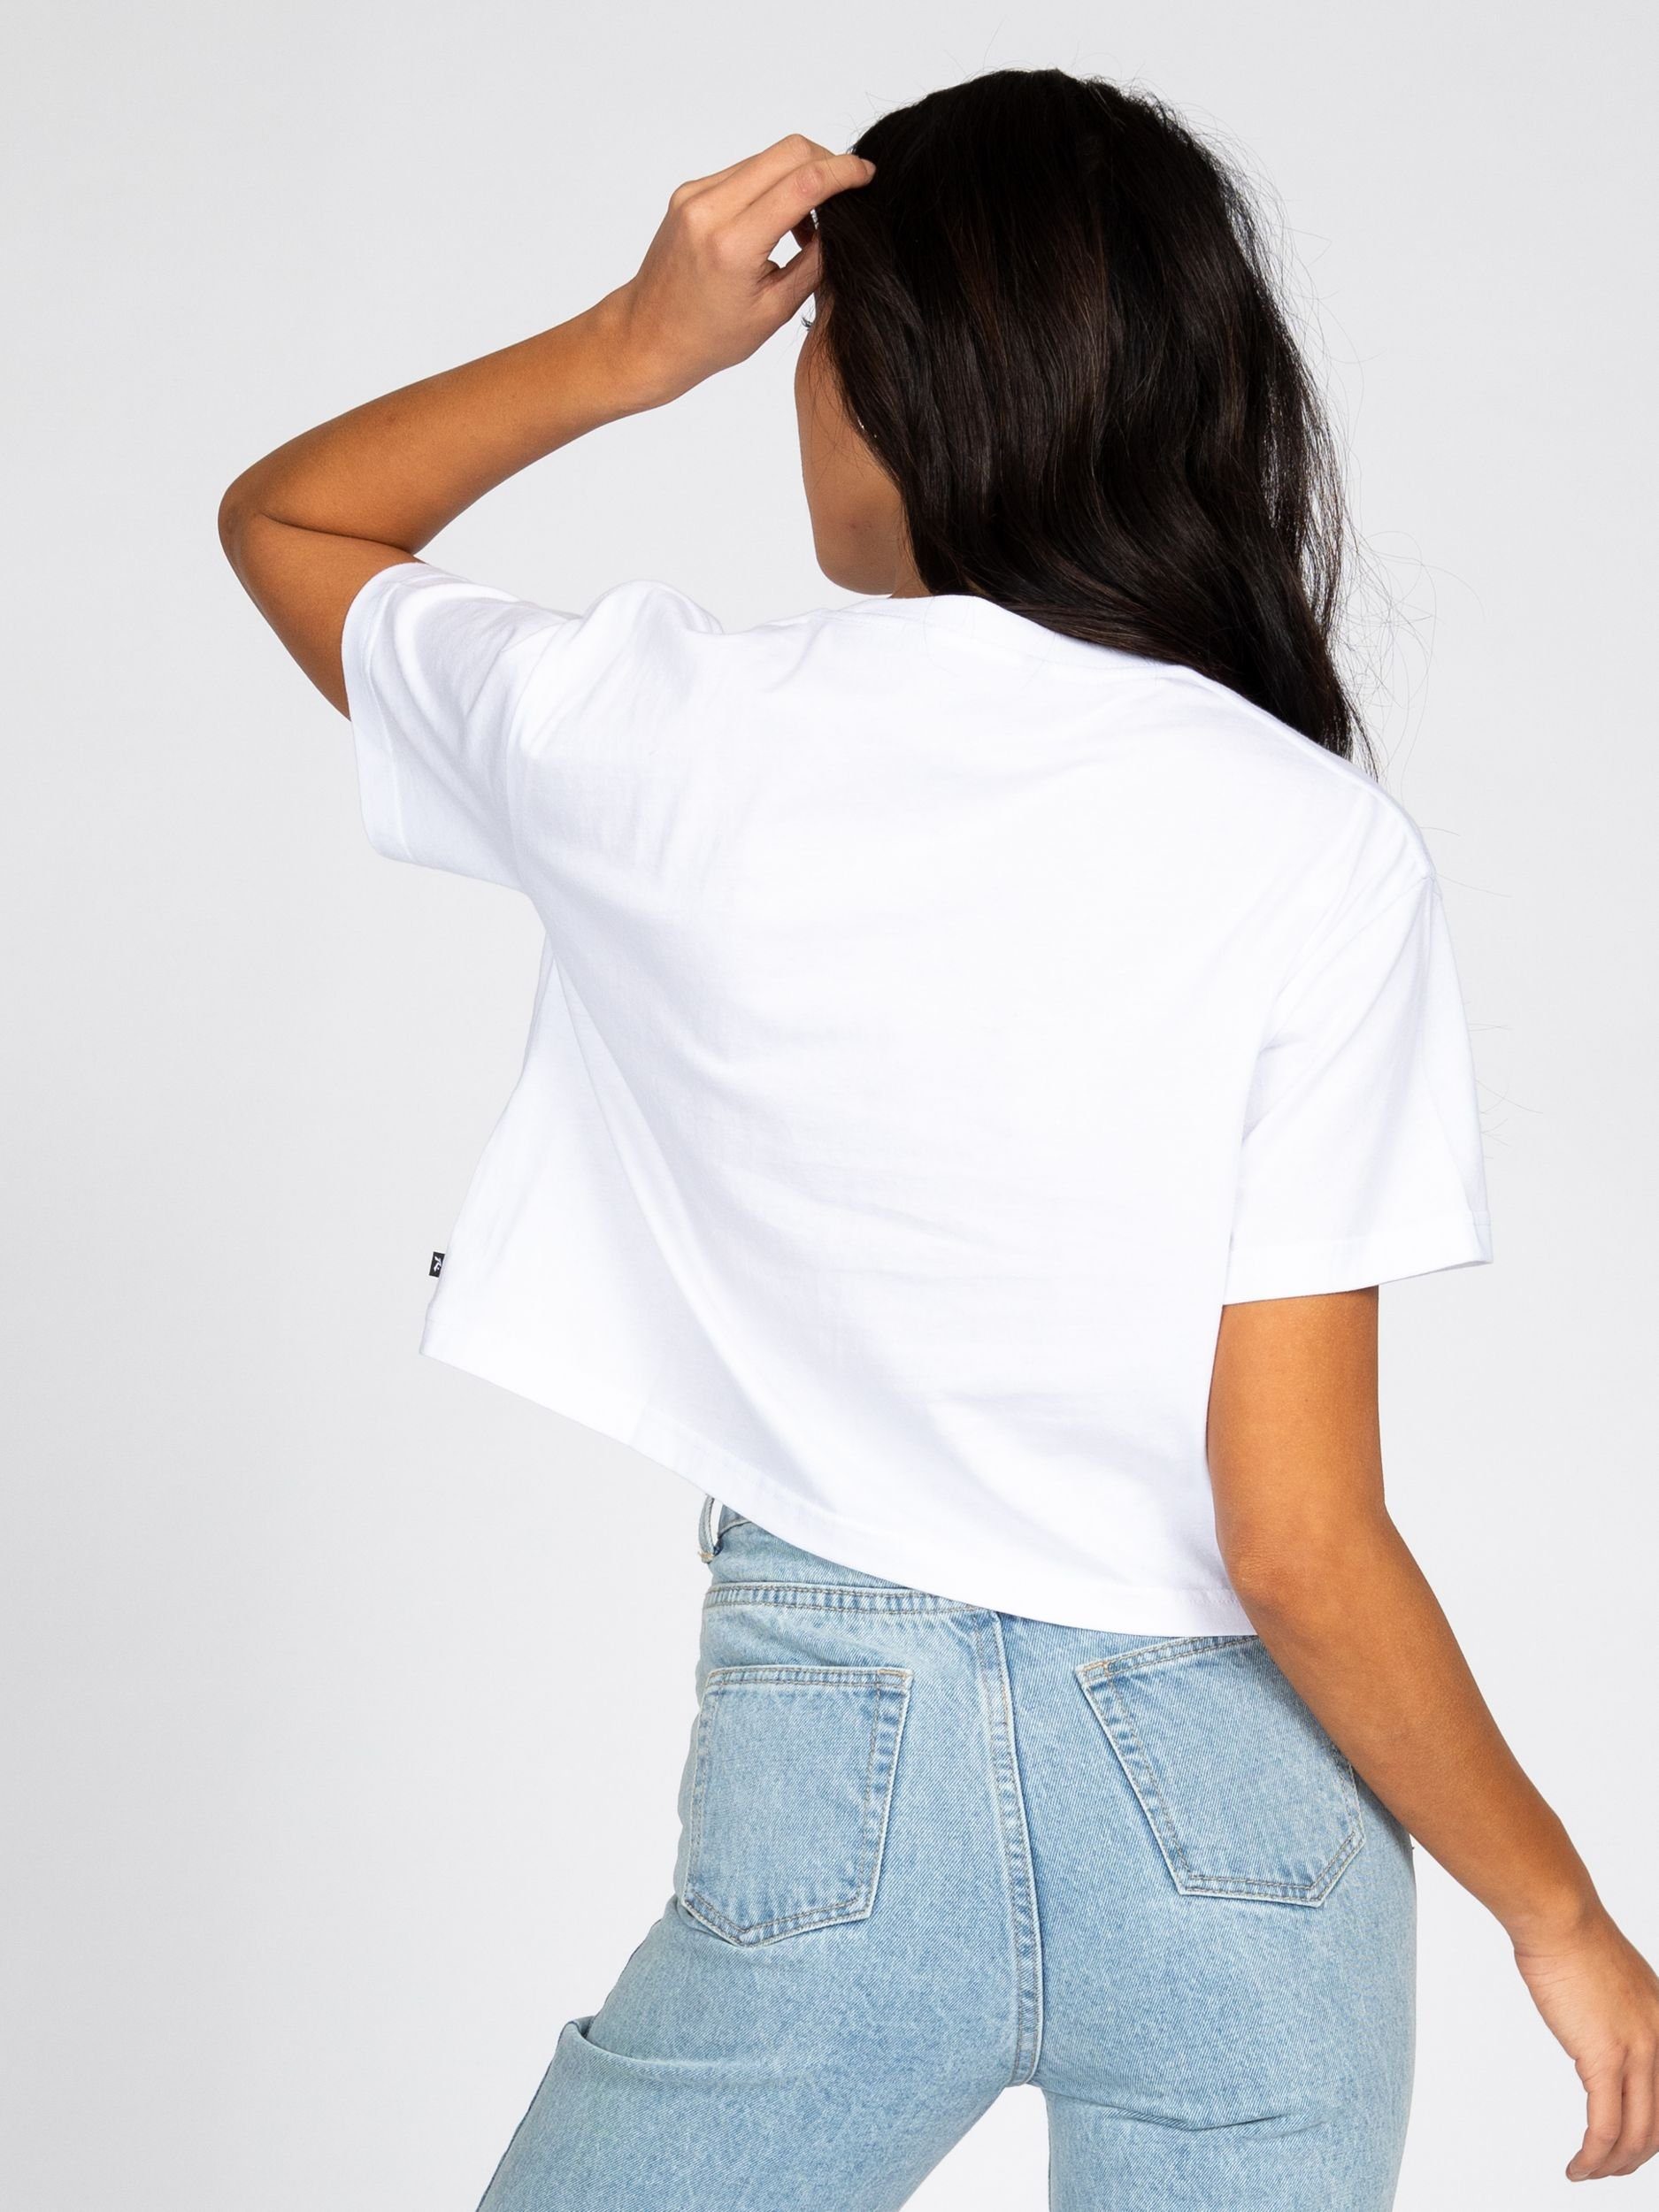 FIT White TEE SUNRISE T-Shirt RELAXED Rusty CROP RUSTY